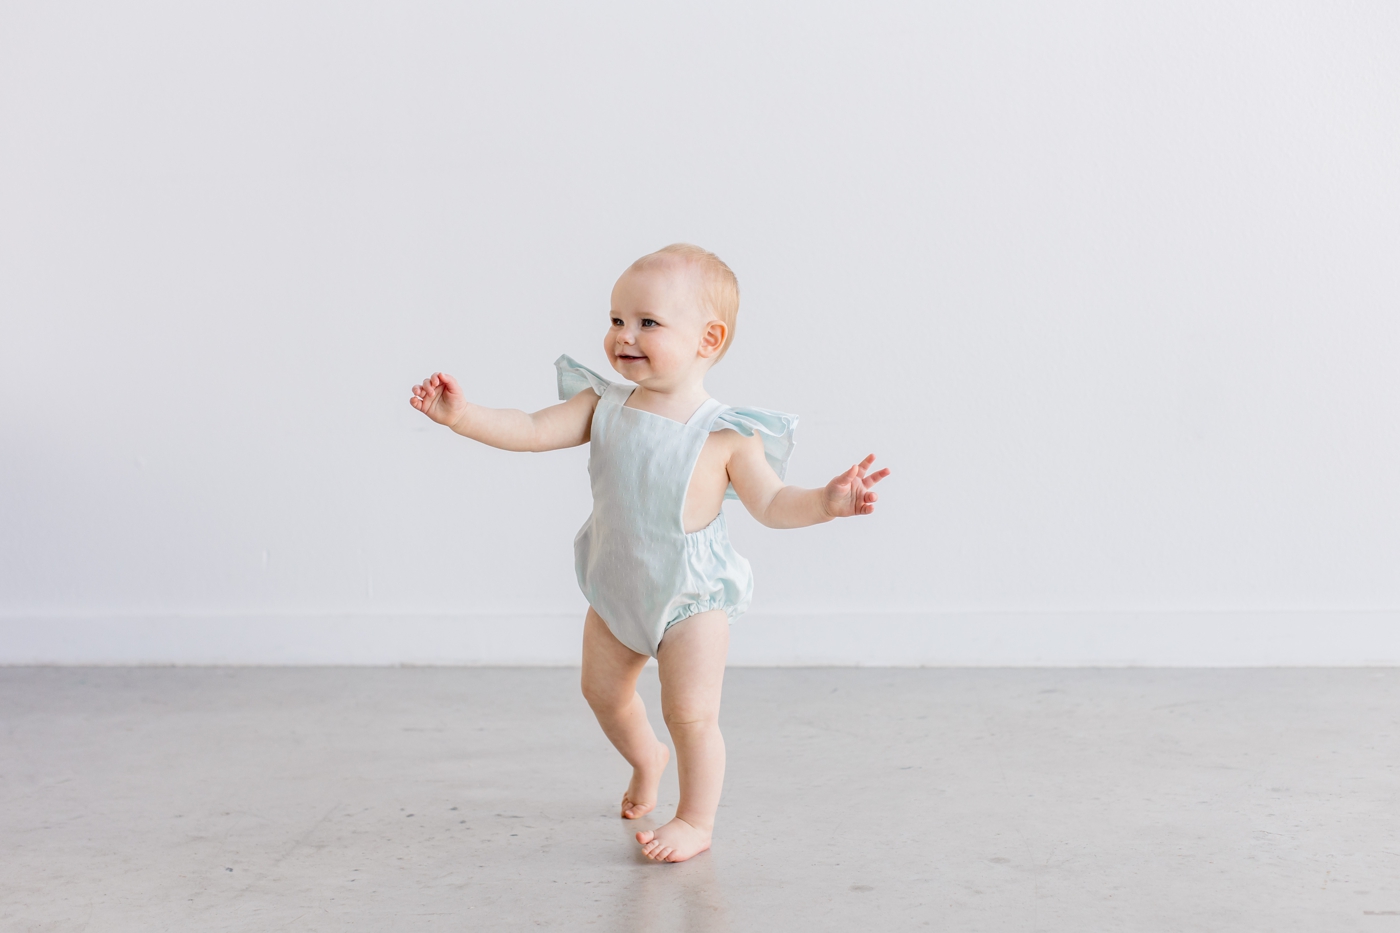 Toddler in romper during first birthday milestone session by Sana Ahmed Photography.